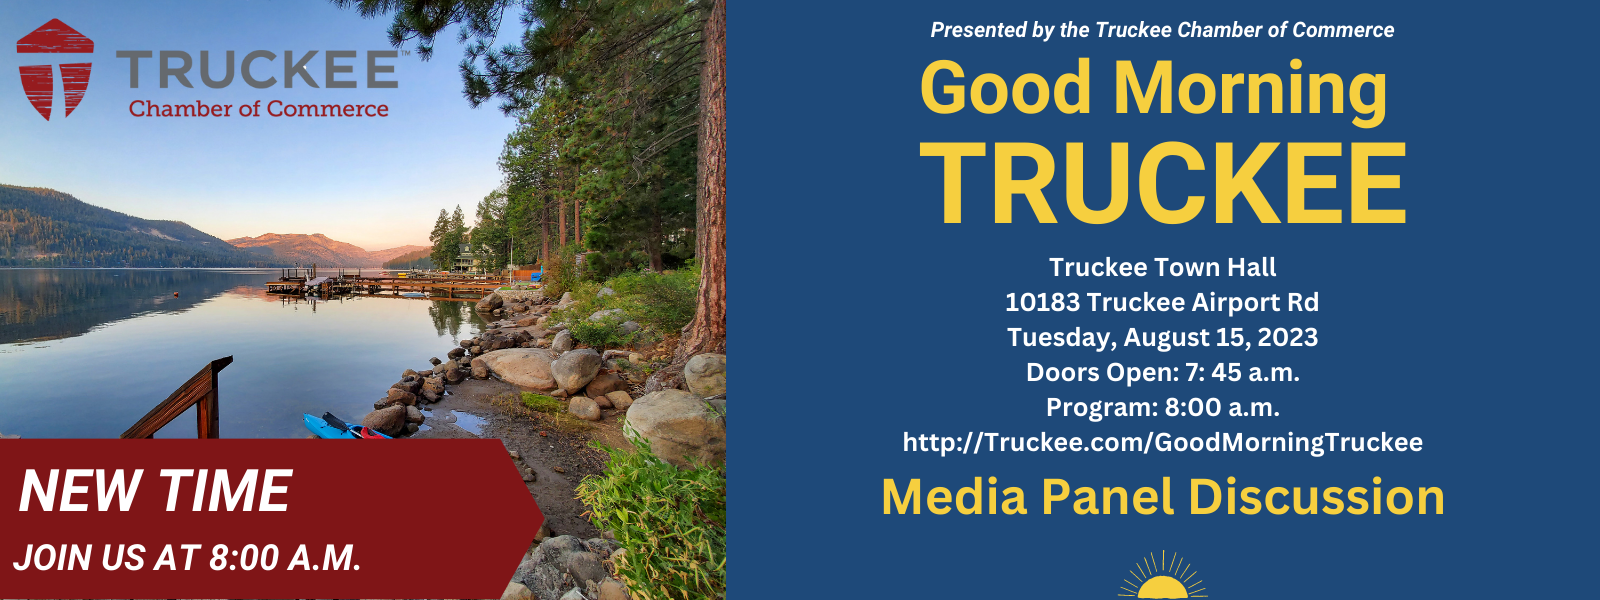 August 15 Good Morning Truckee: Media Panel Discussion - New Time - 8:00 a.m!